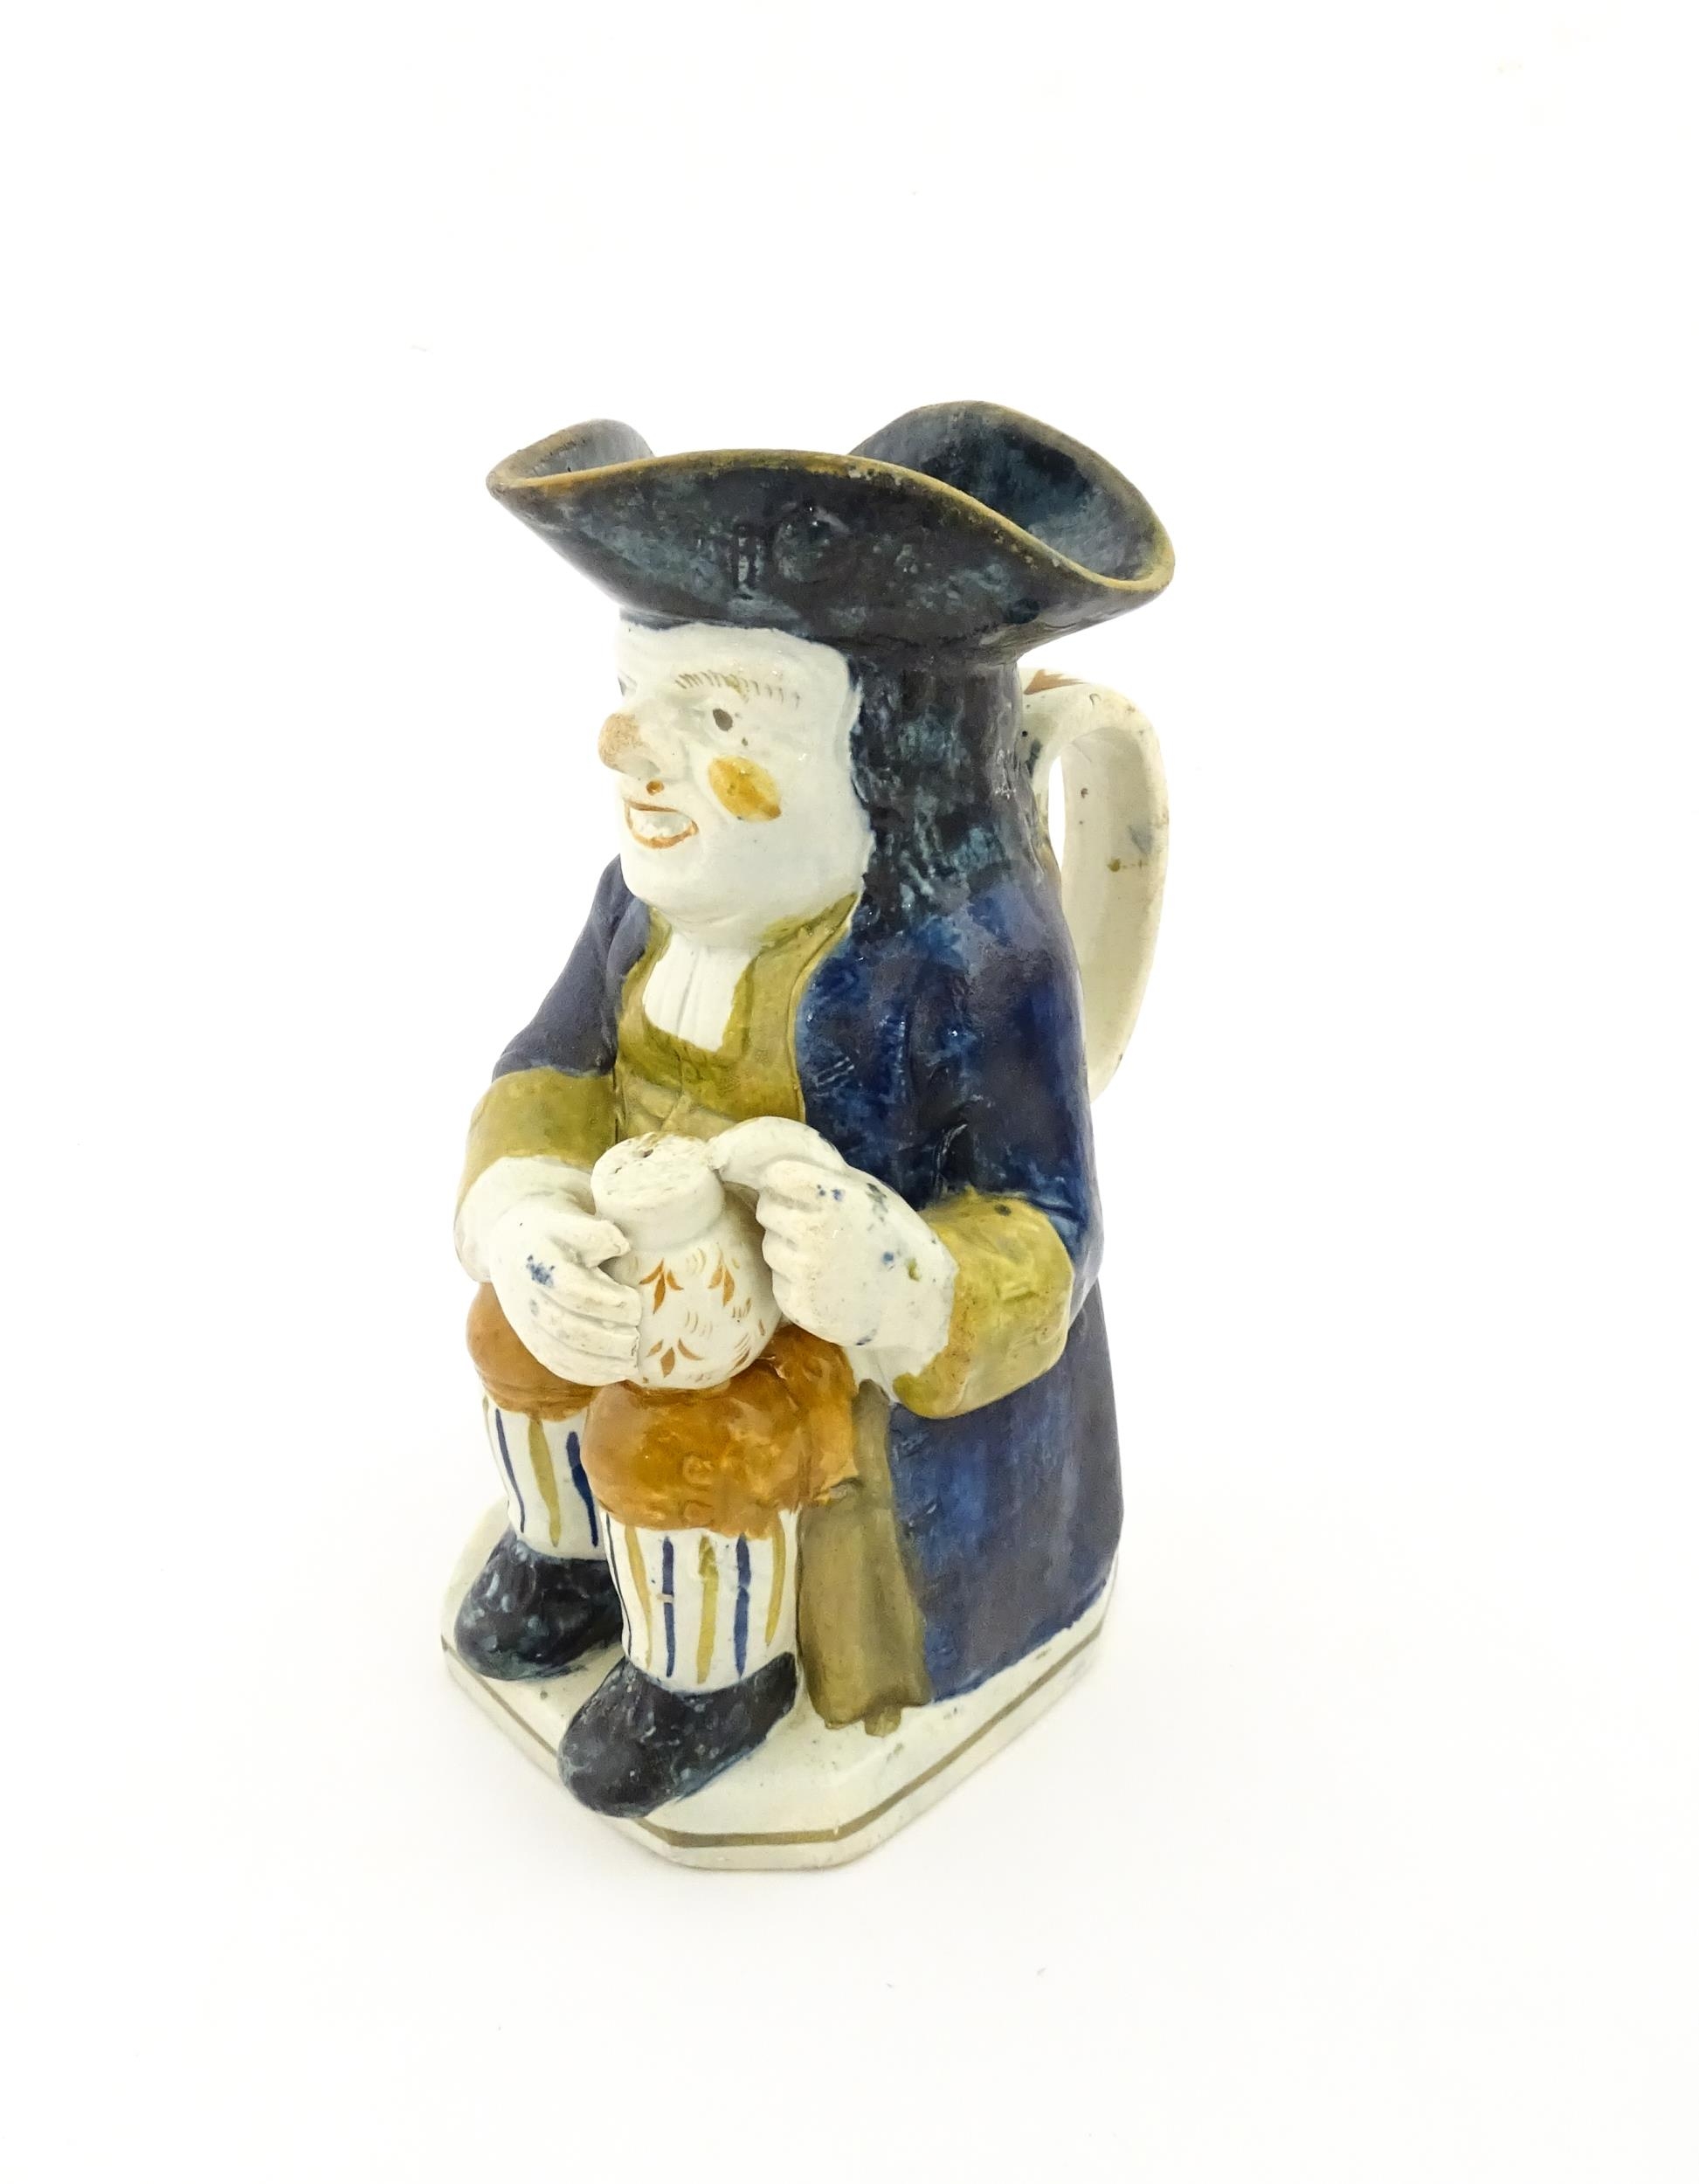 A 19thC Staffordshire pottery character Toby jug decorated in Pratt colours. Approx. 9 1/4" high